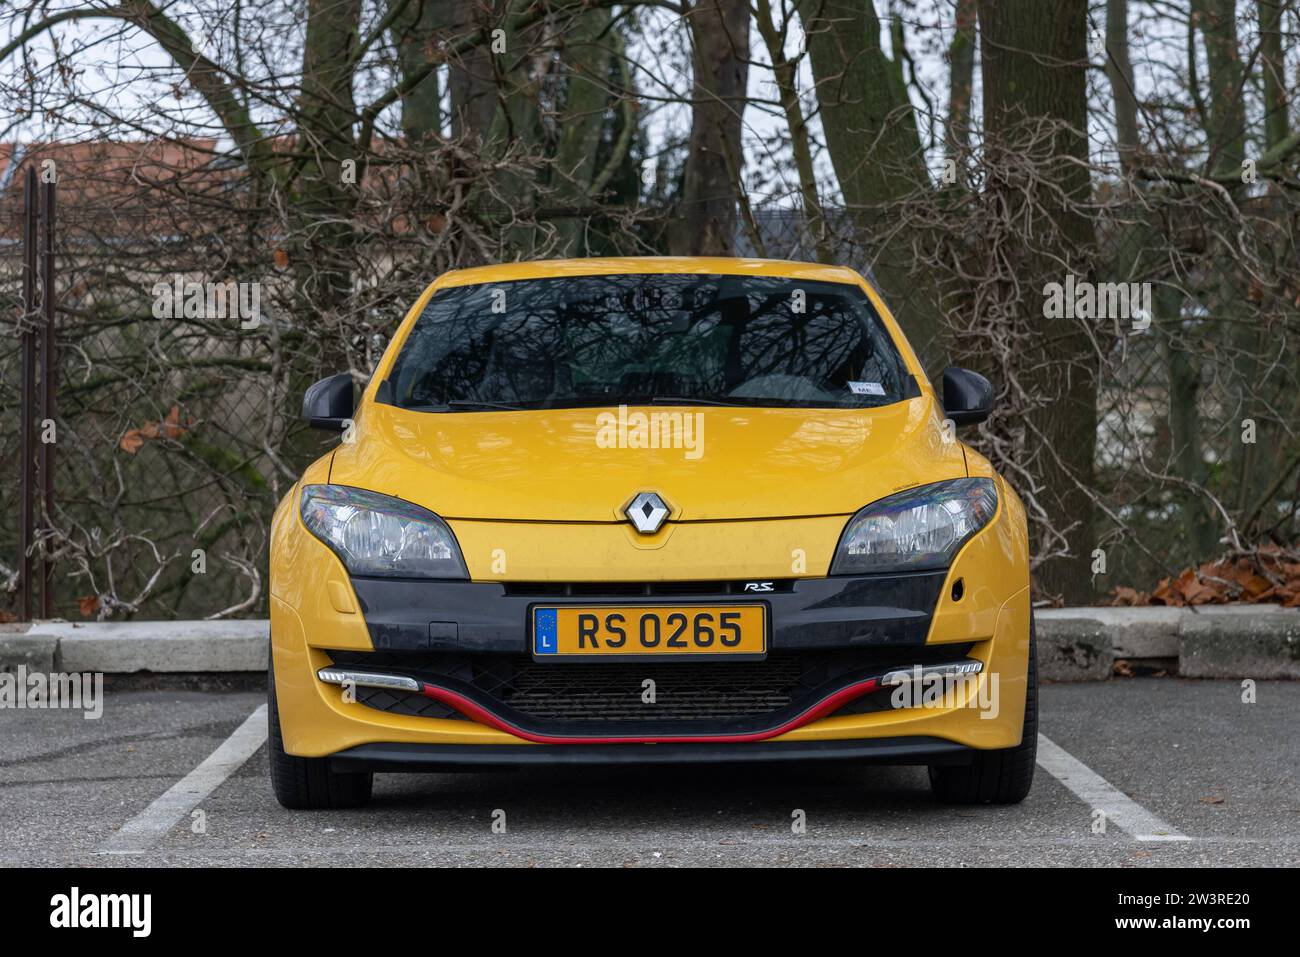 Nancy, France - Yellow Renault Mégane RS parked on the street. Stock Photo